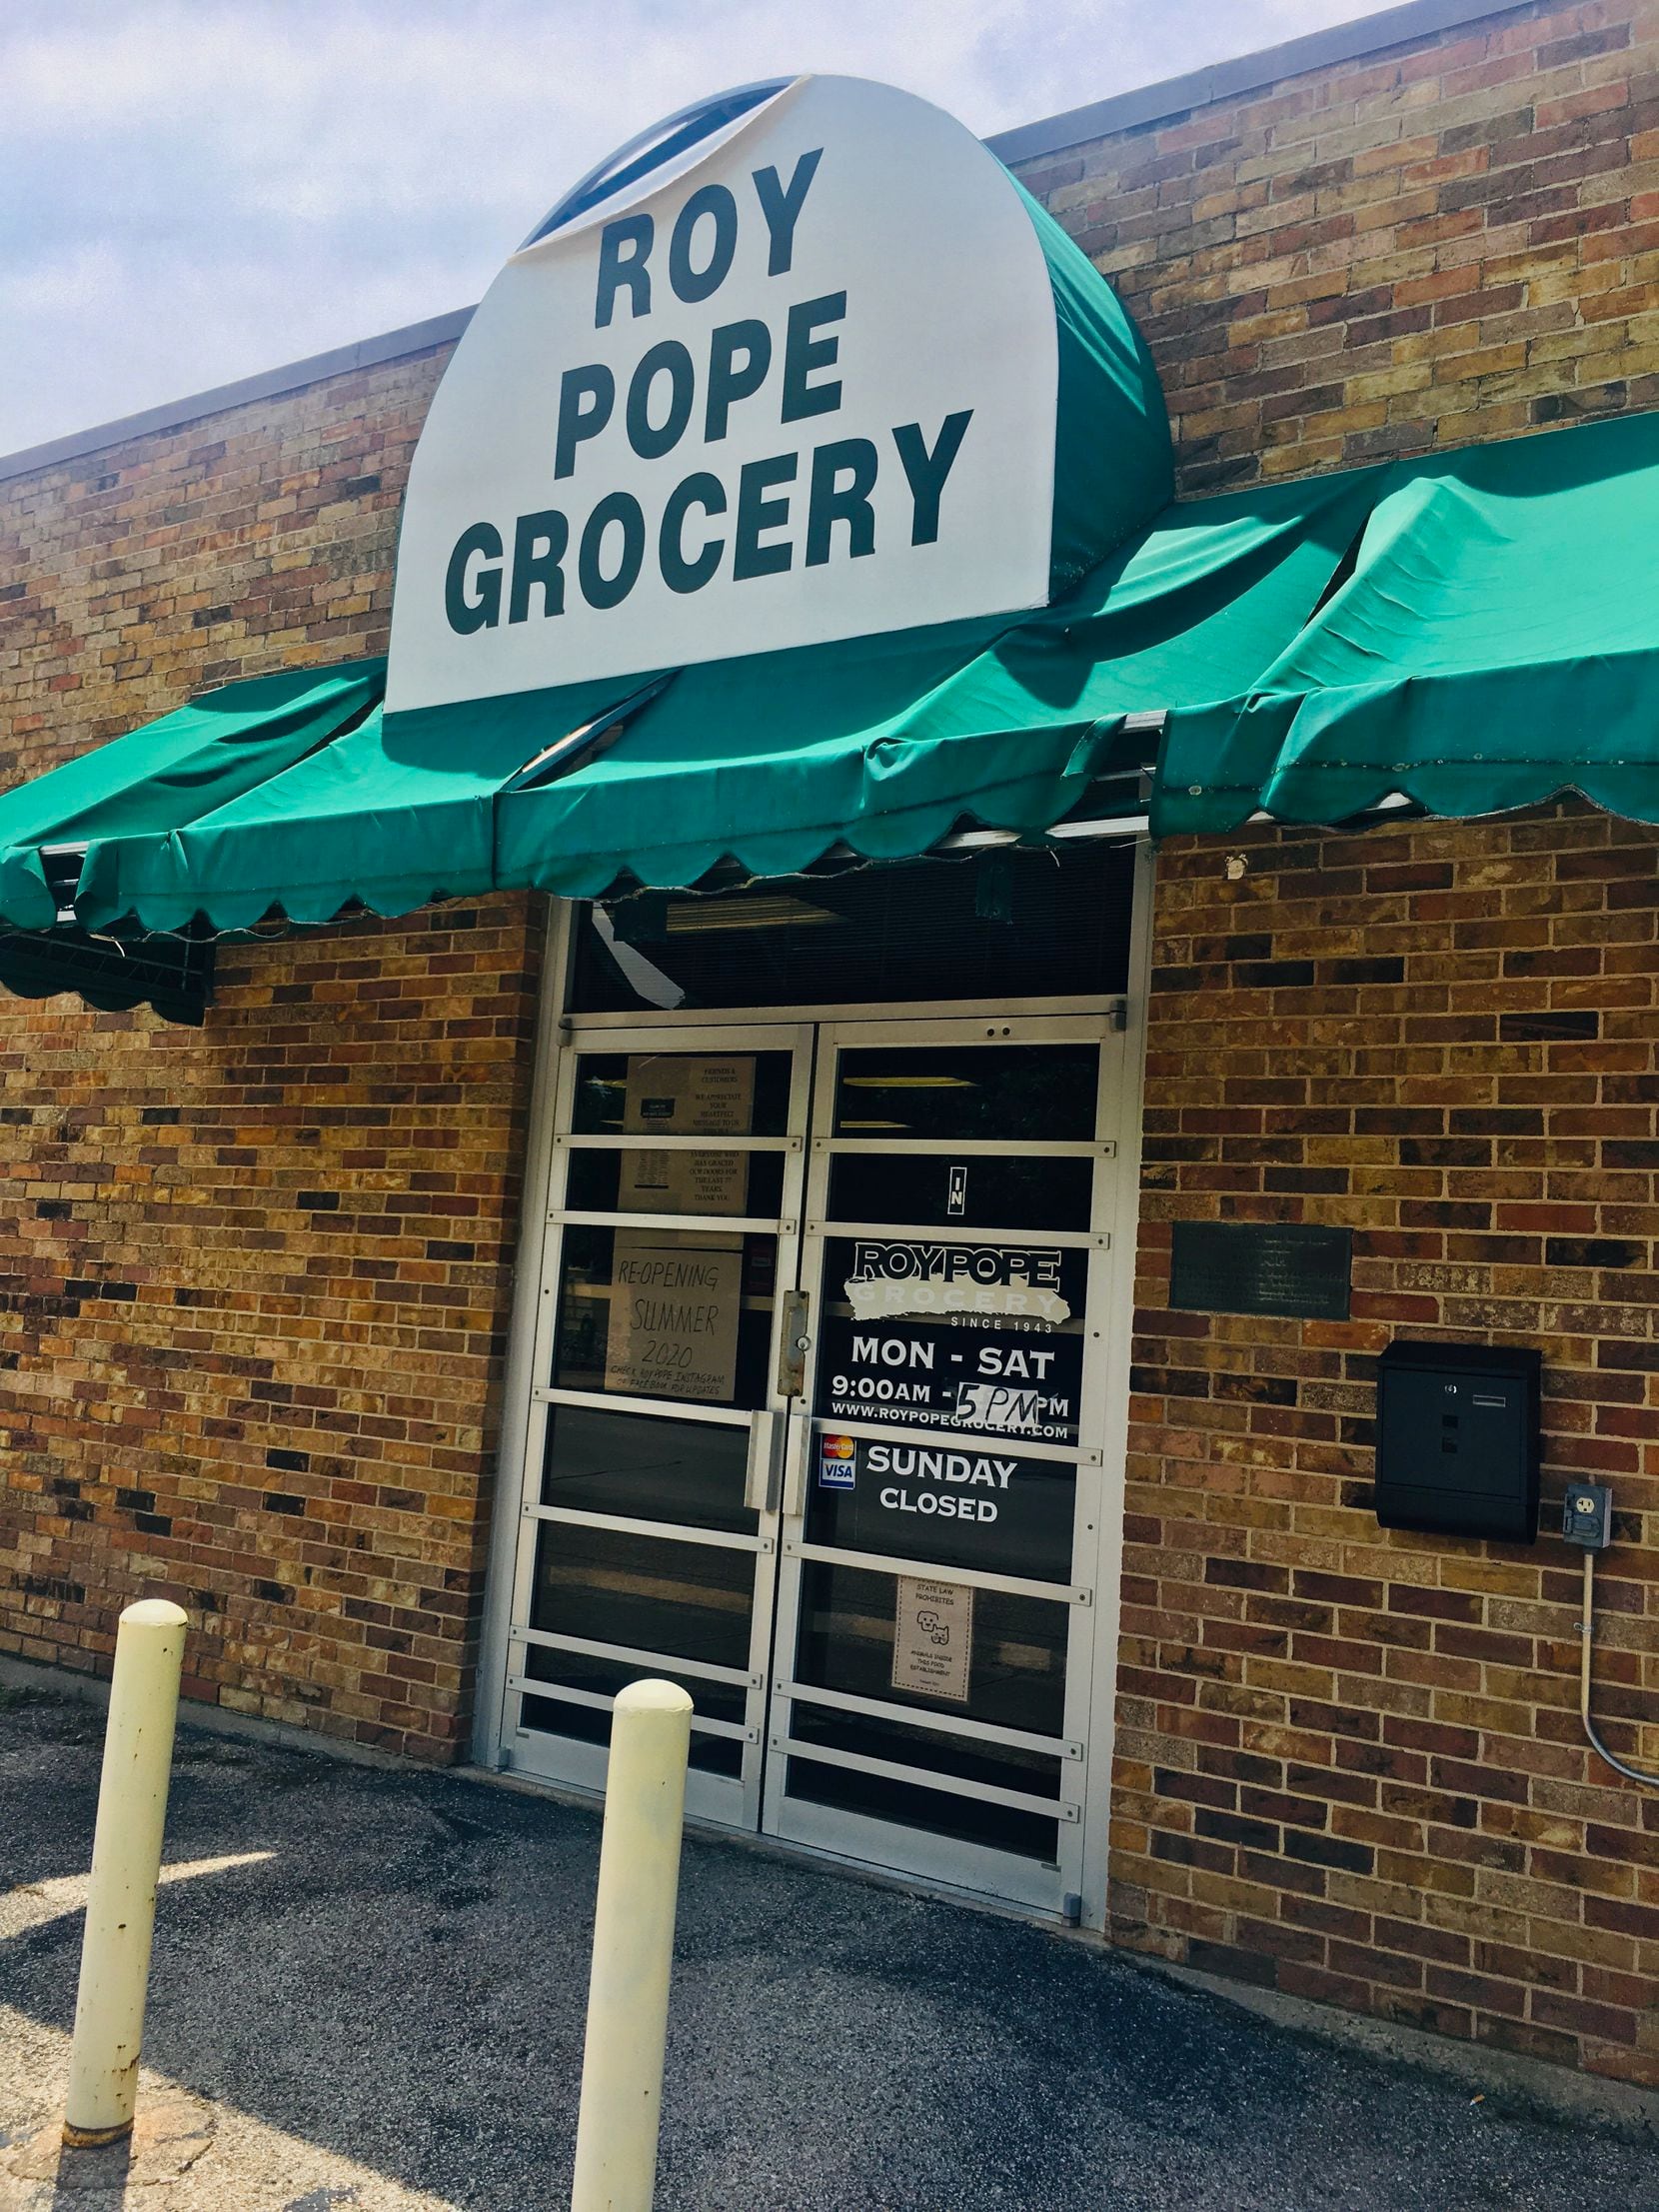 The historic Roy Pope Grocery in Fort Worth will reopen.